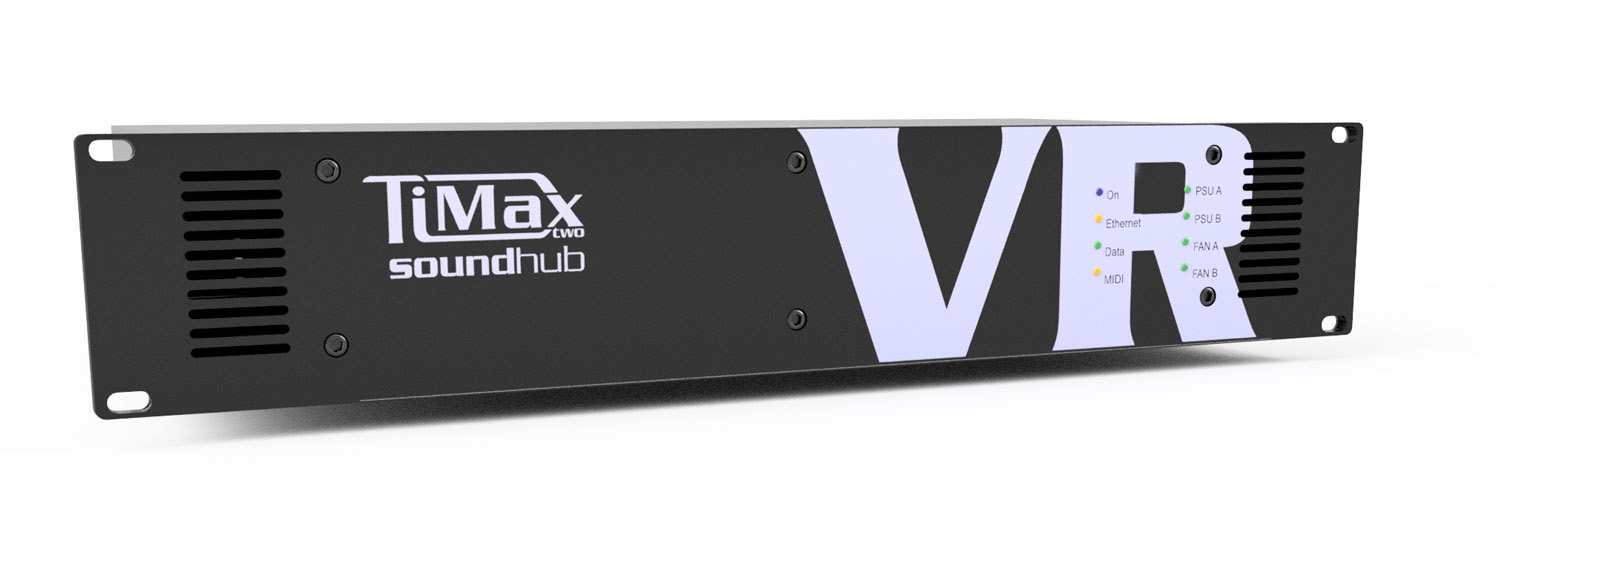 TiMax Soundhub VR front